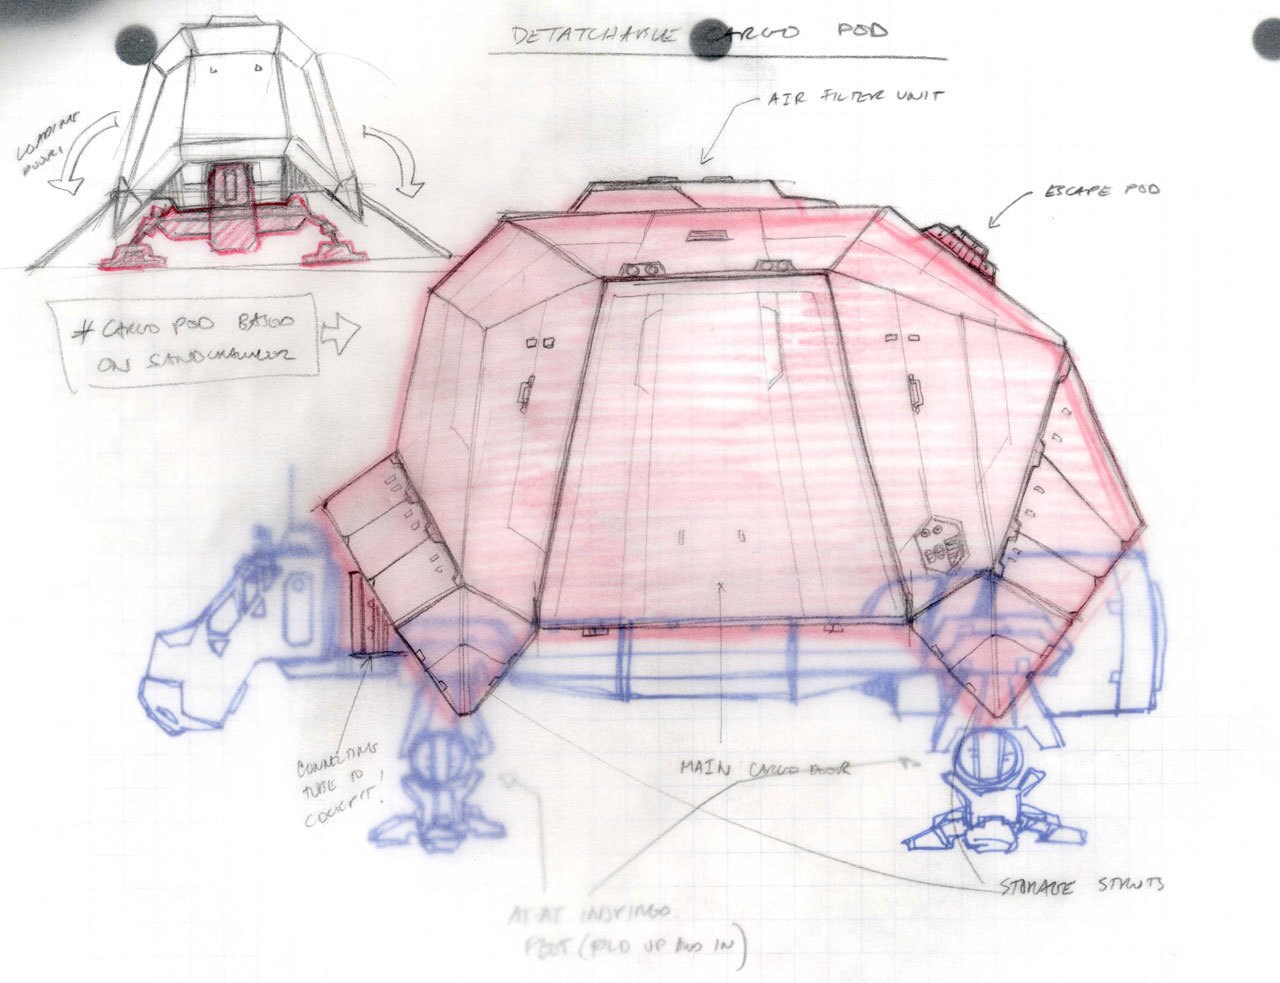 The Turtle Tank design was inspired by Dave Filoni's pet turtle, Goji. Illustration by Dave Filoni.